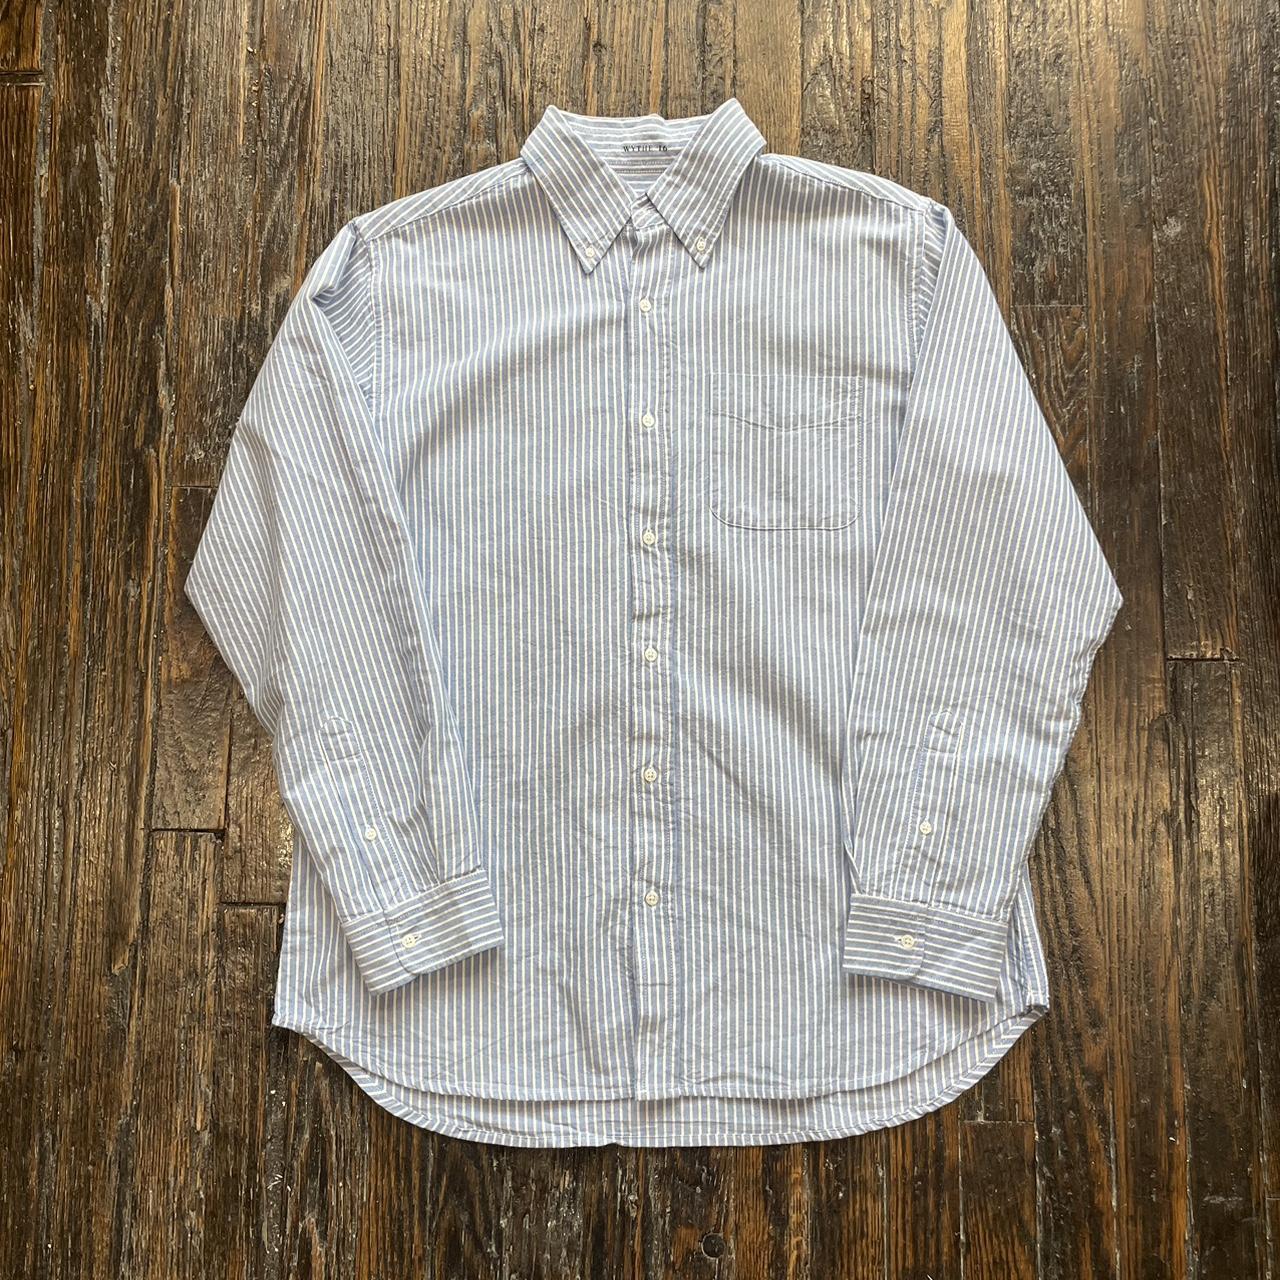 WYTHE NEW YORK STRIPED OXFORD SHIRT PERFECT CASUAL... - Depop